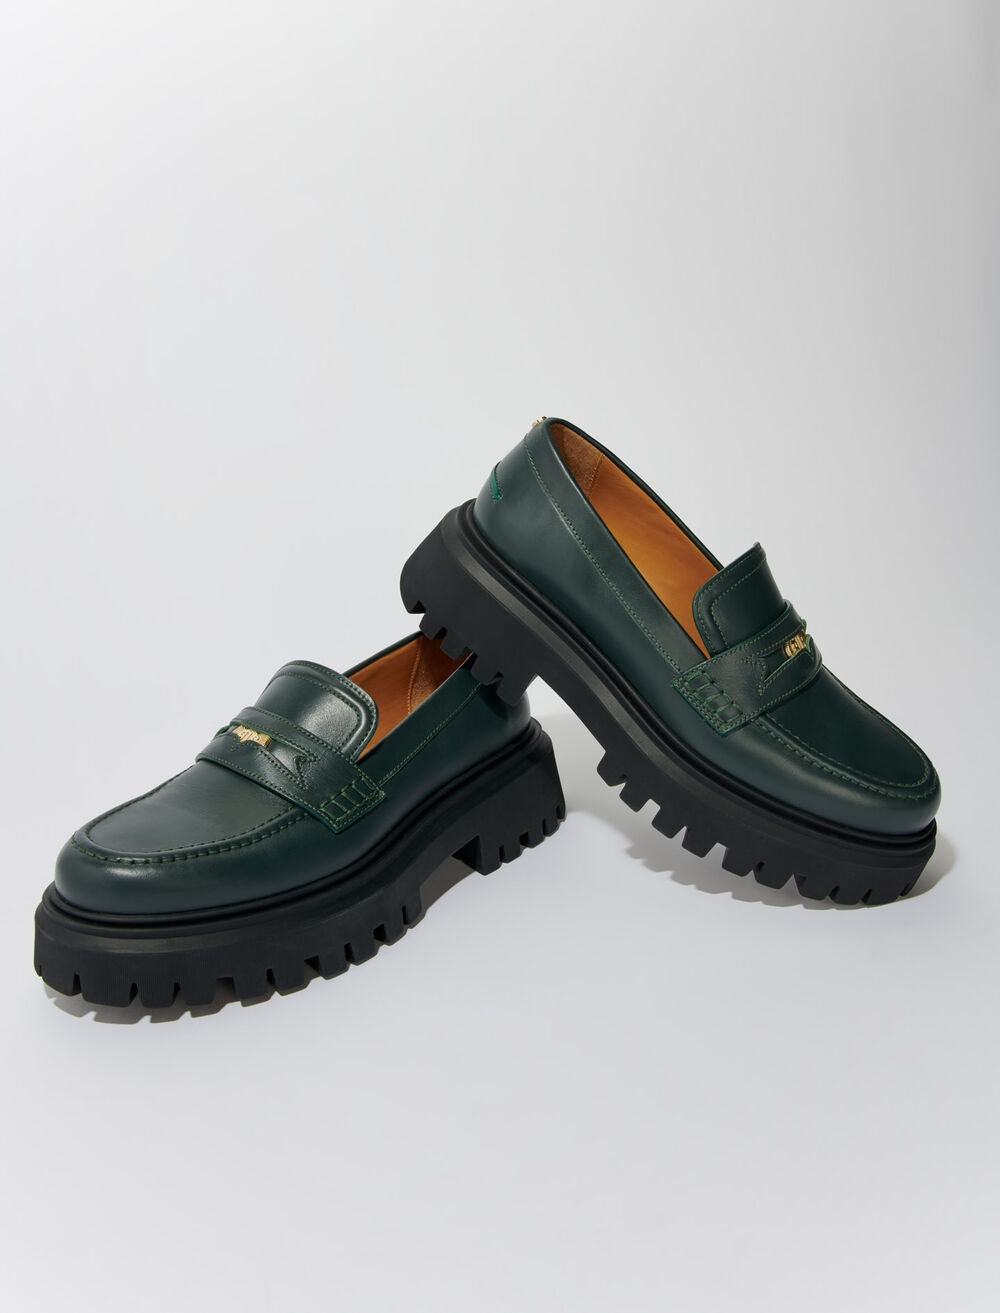 Bottle Green featured LEATHER PLATFORM LOAFERS